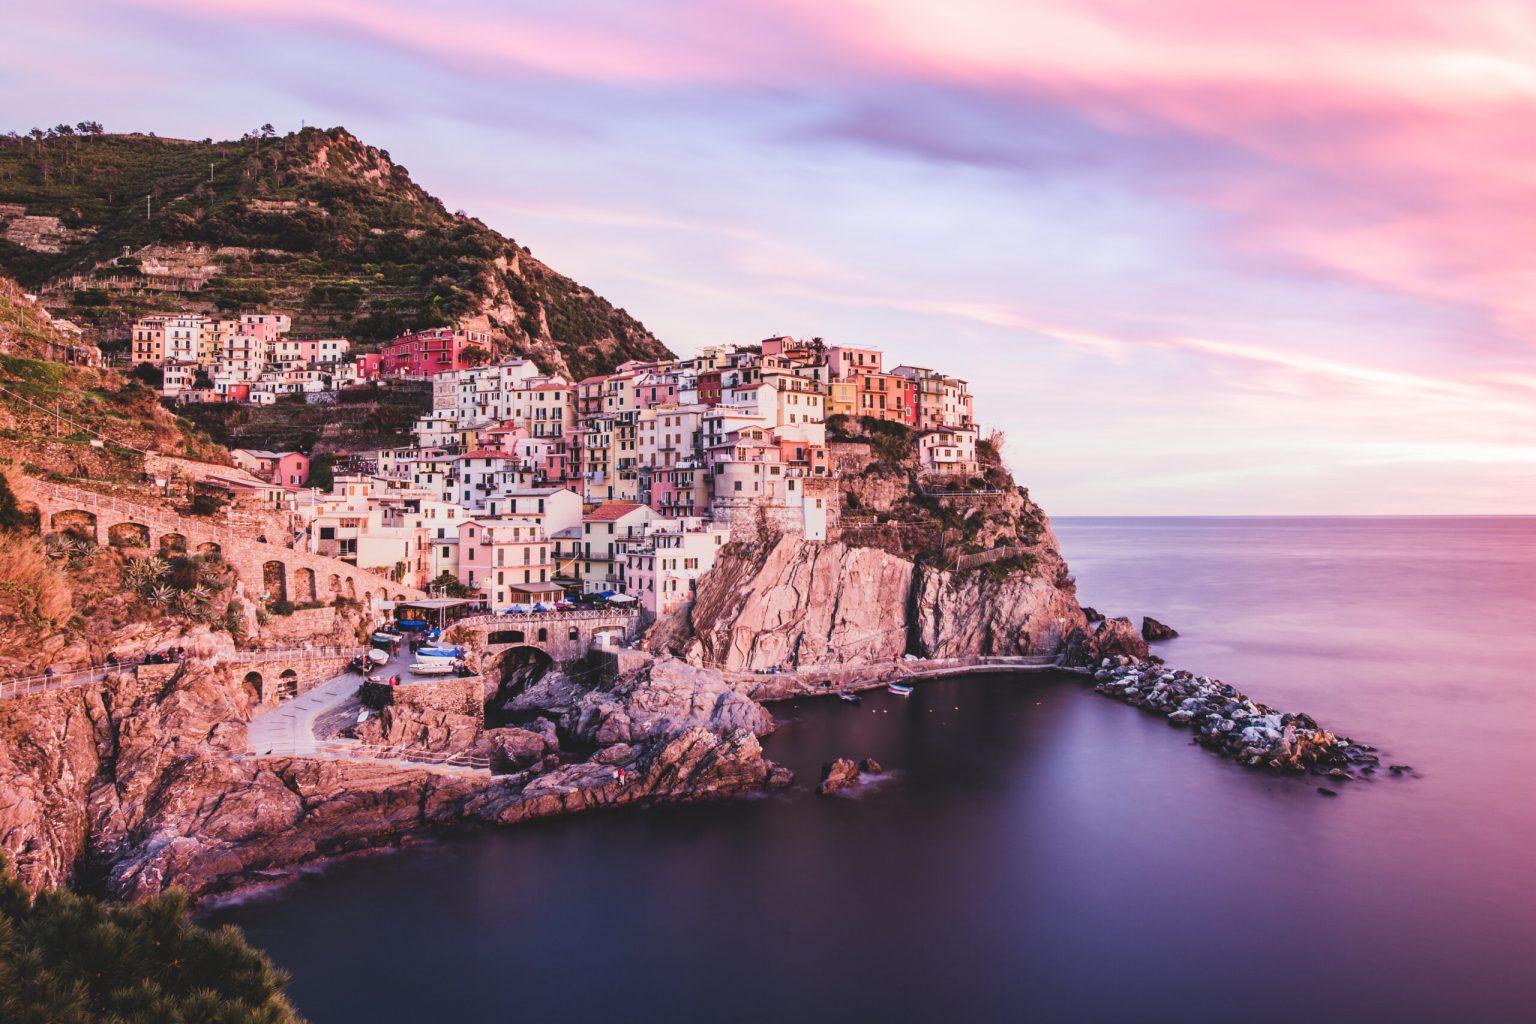 Italy, Cinque Terre National Park: Panoramic side view of Manarola, one of the five coastal villages of the Cinque Terre national park, at sunset. Photo and story credits by Alessandro Bosio